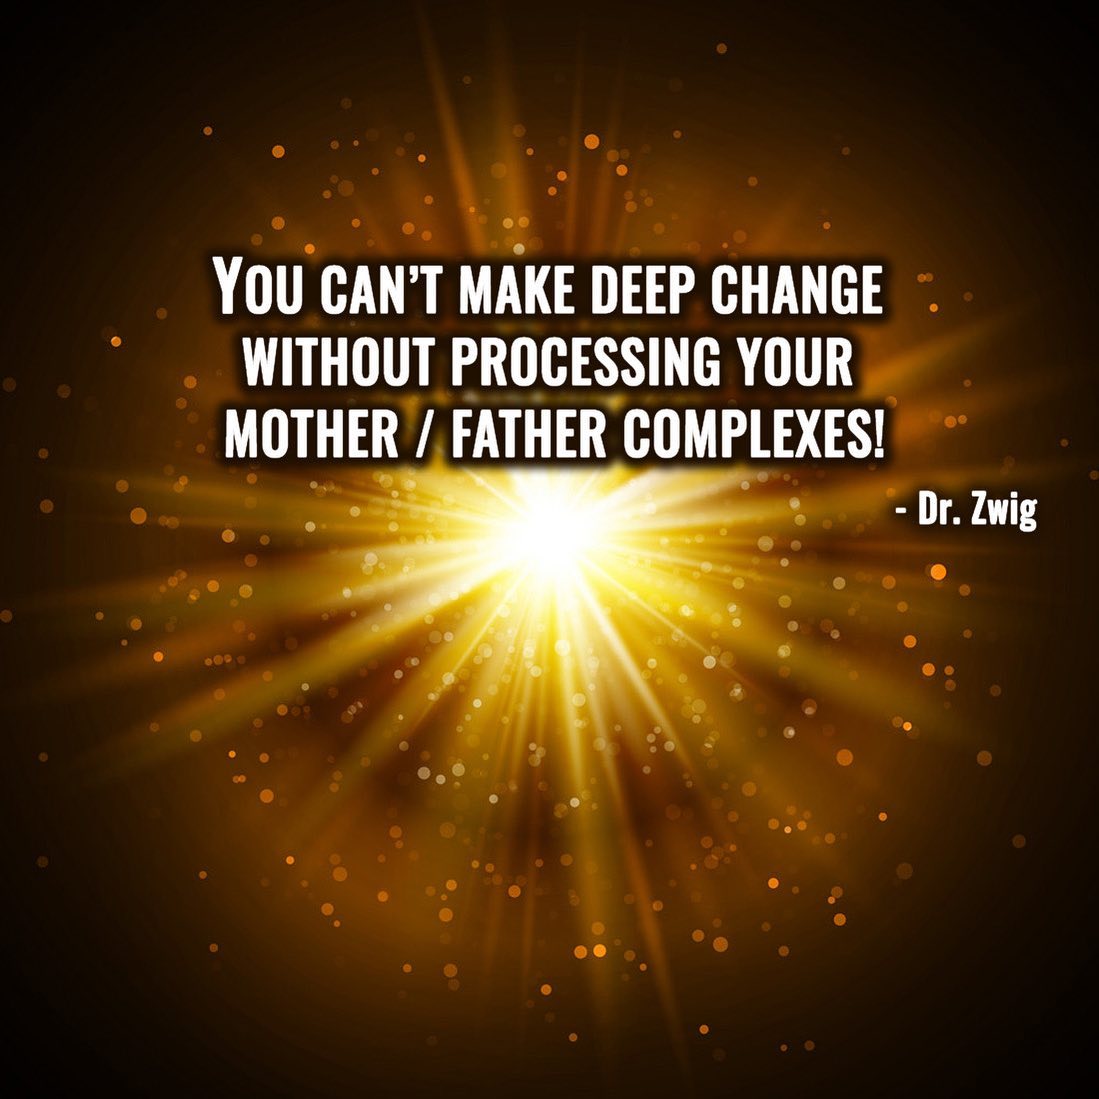 You can’t make deep change without processing your mother / father complexes!